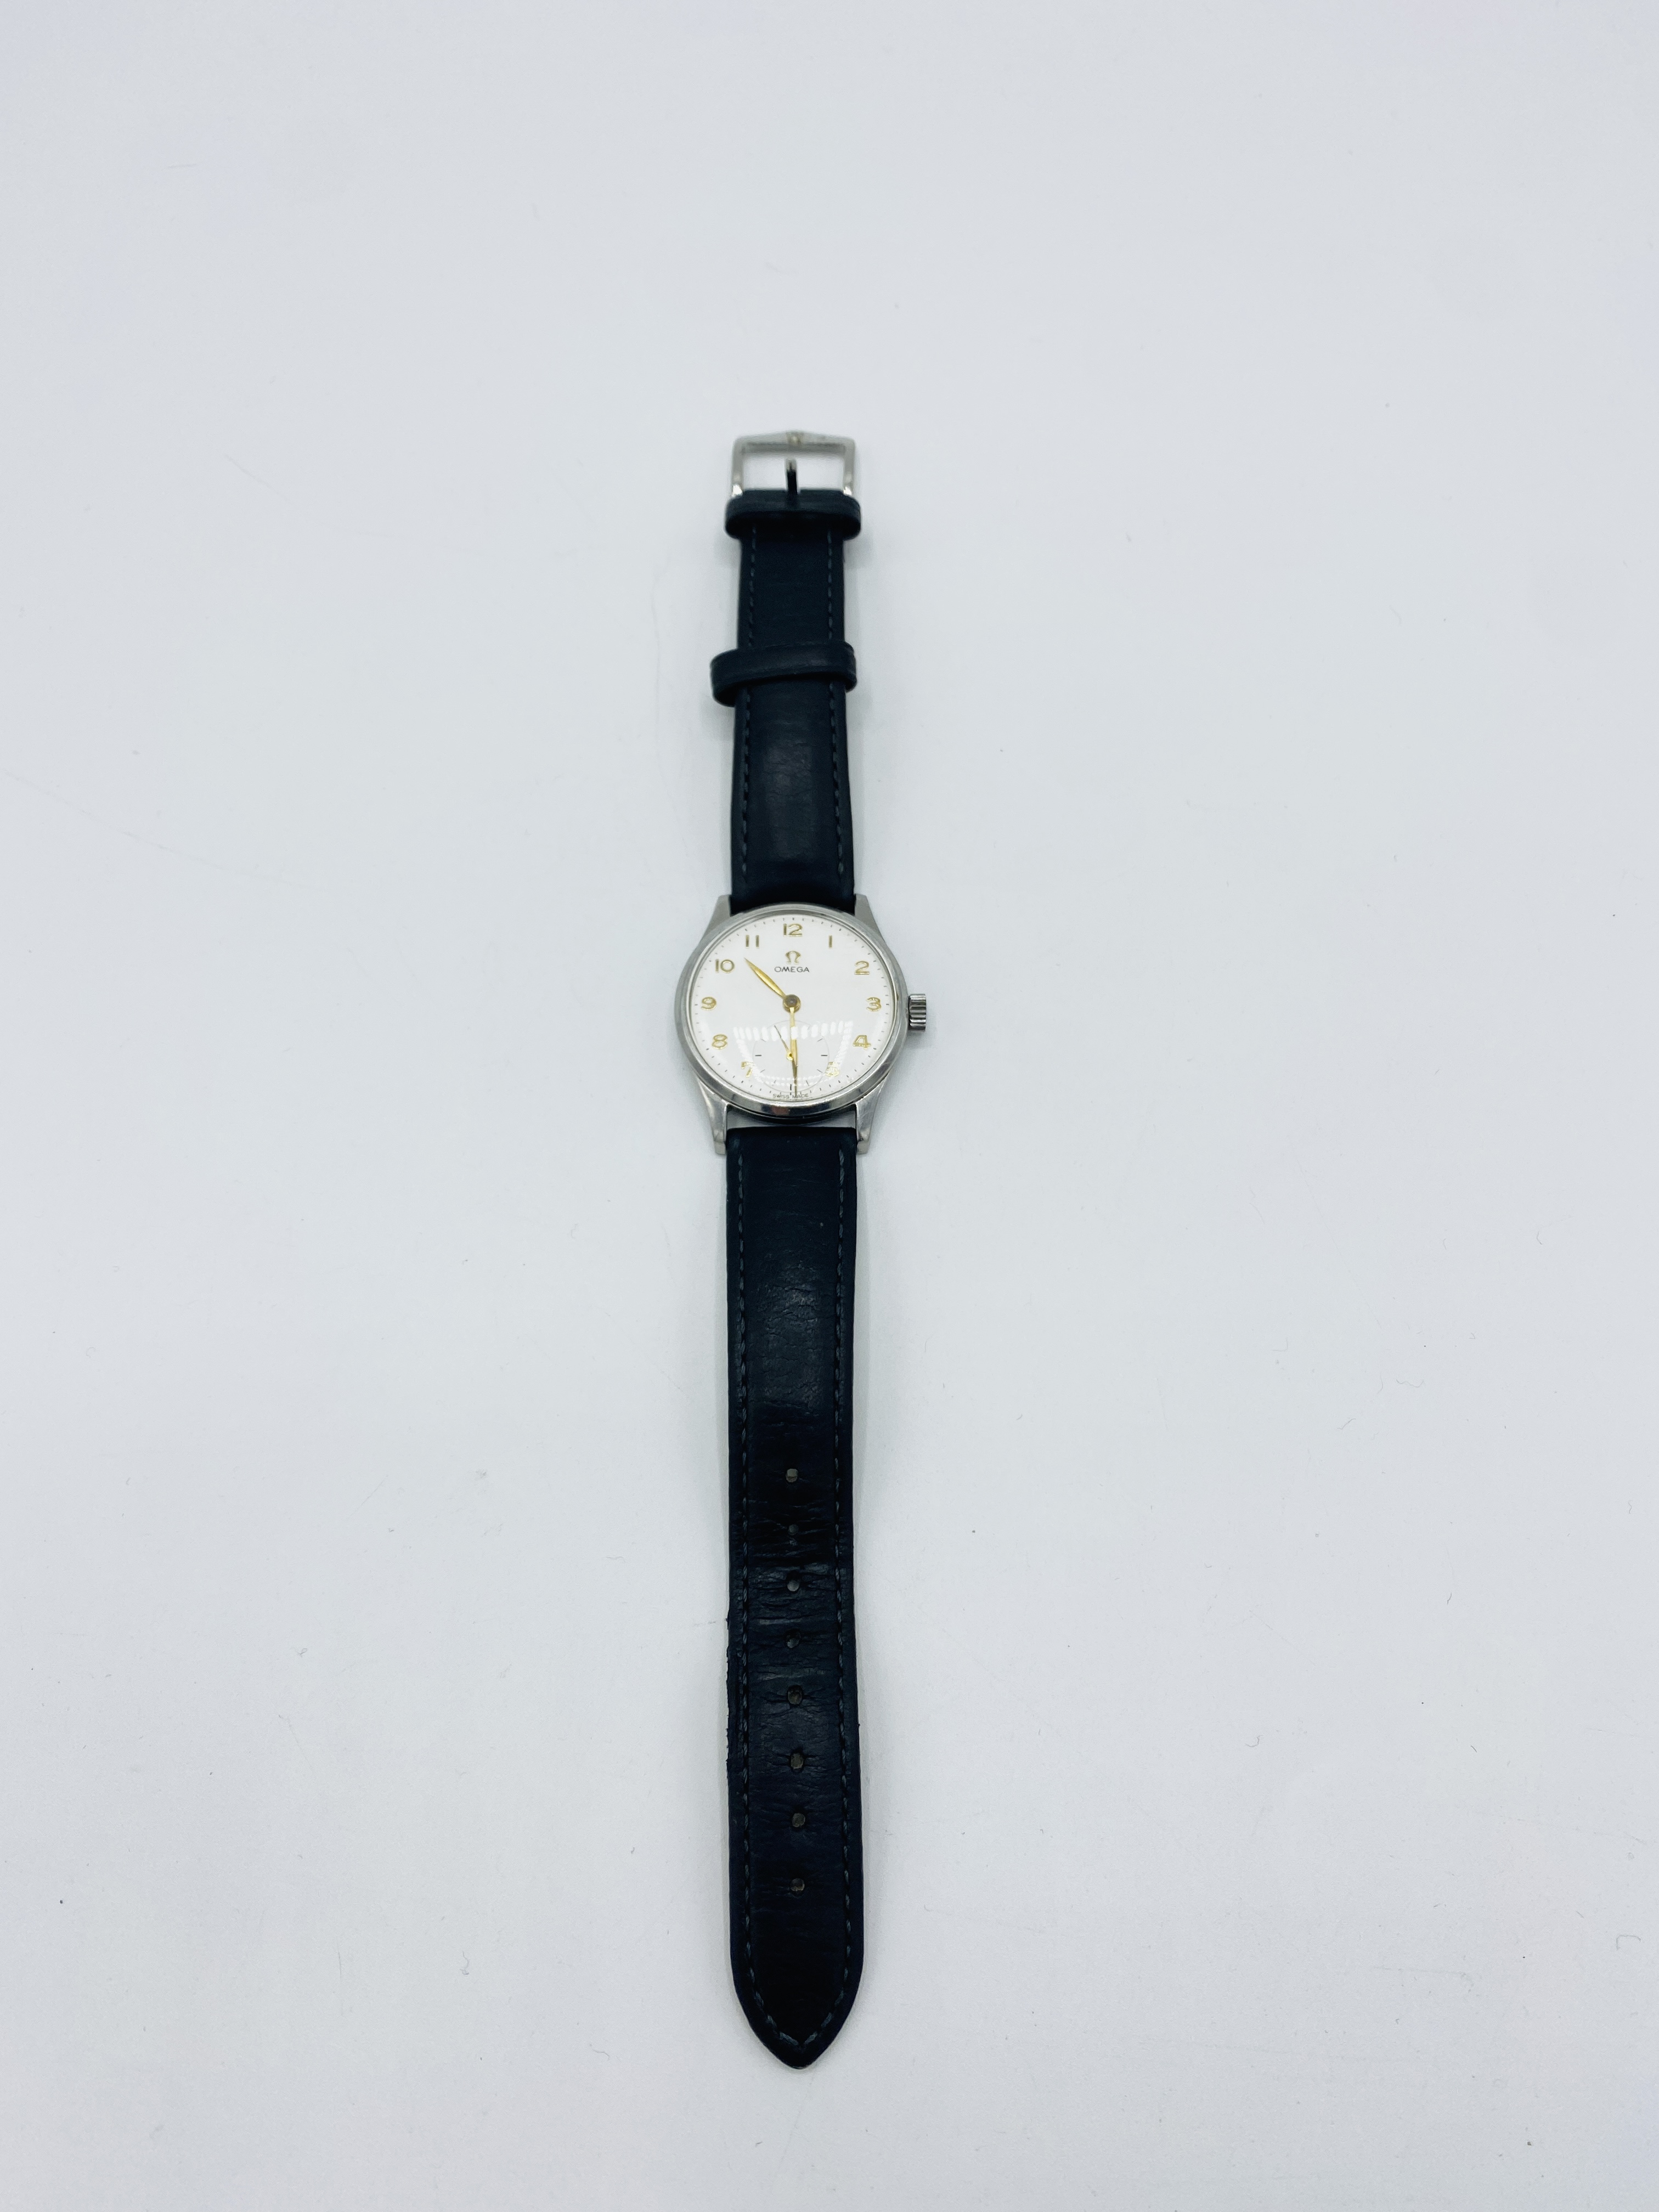 1950 Omega calibre 265 15 jewels wrist watch, going - Image 4 of 4